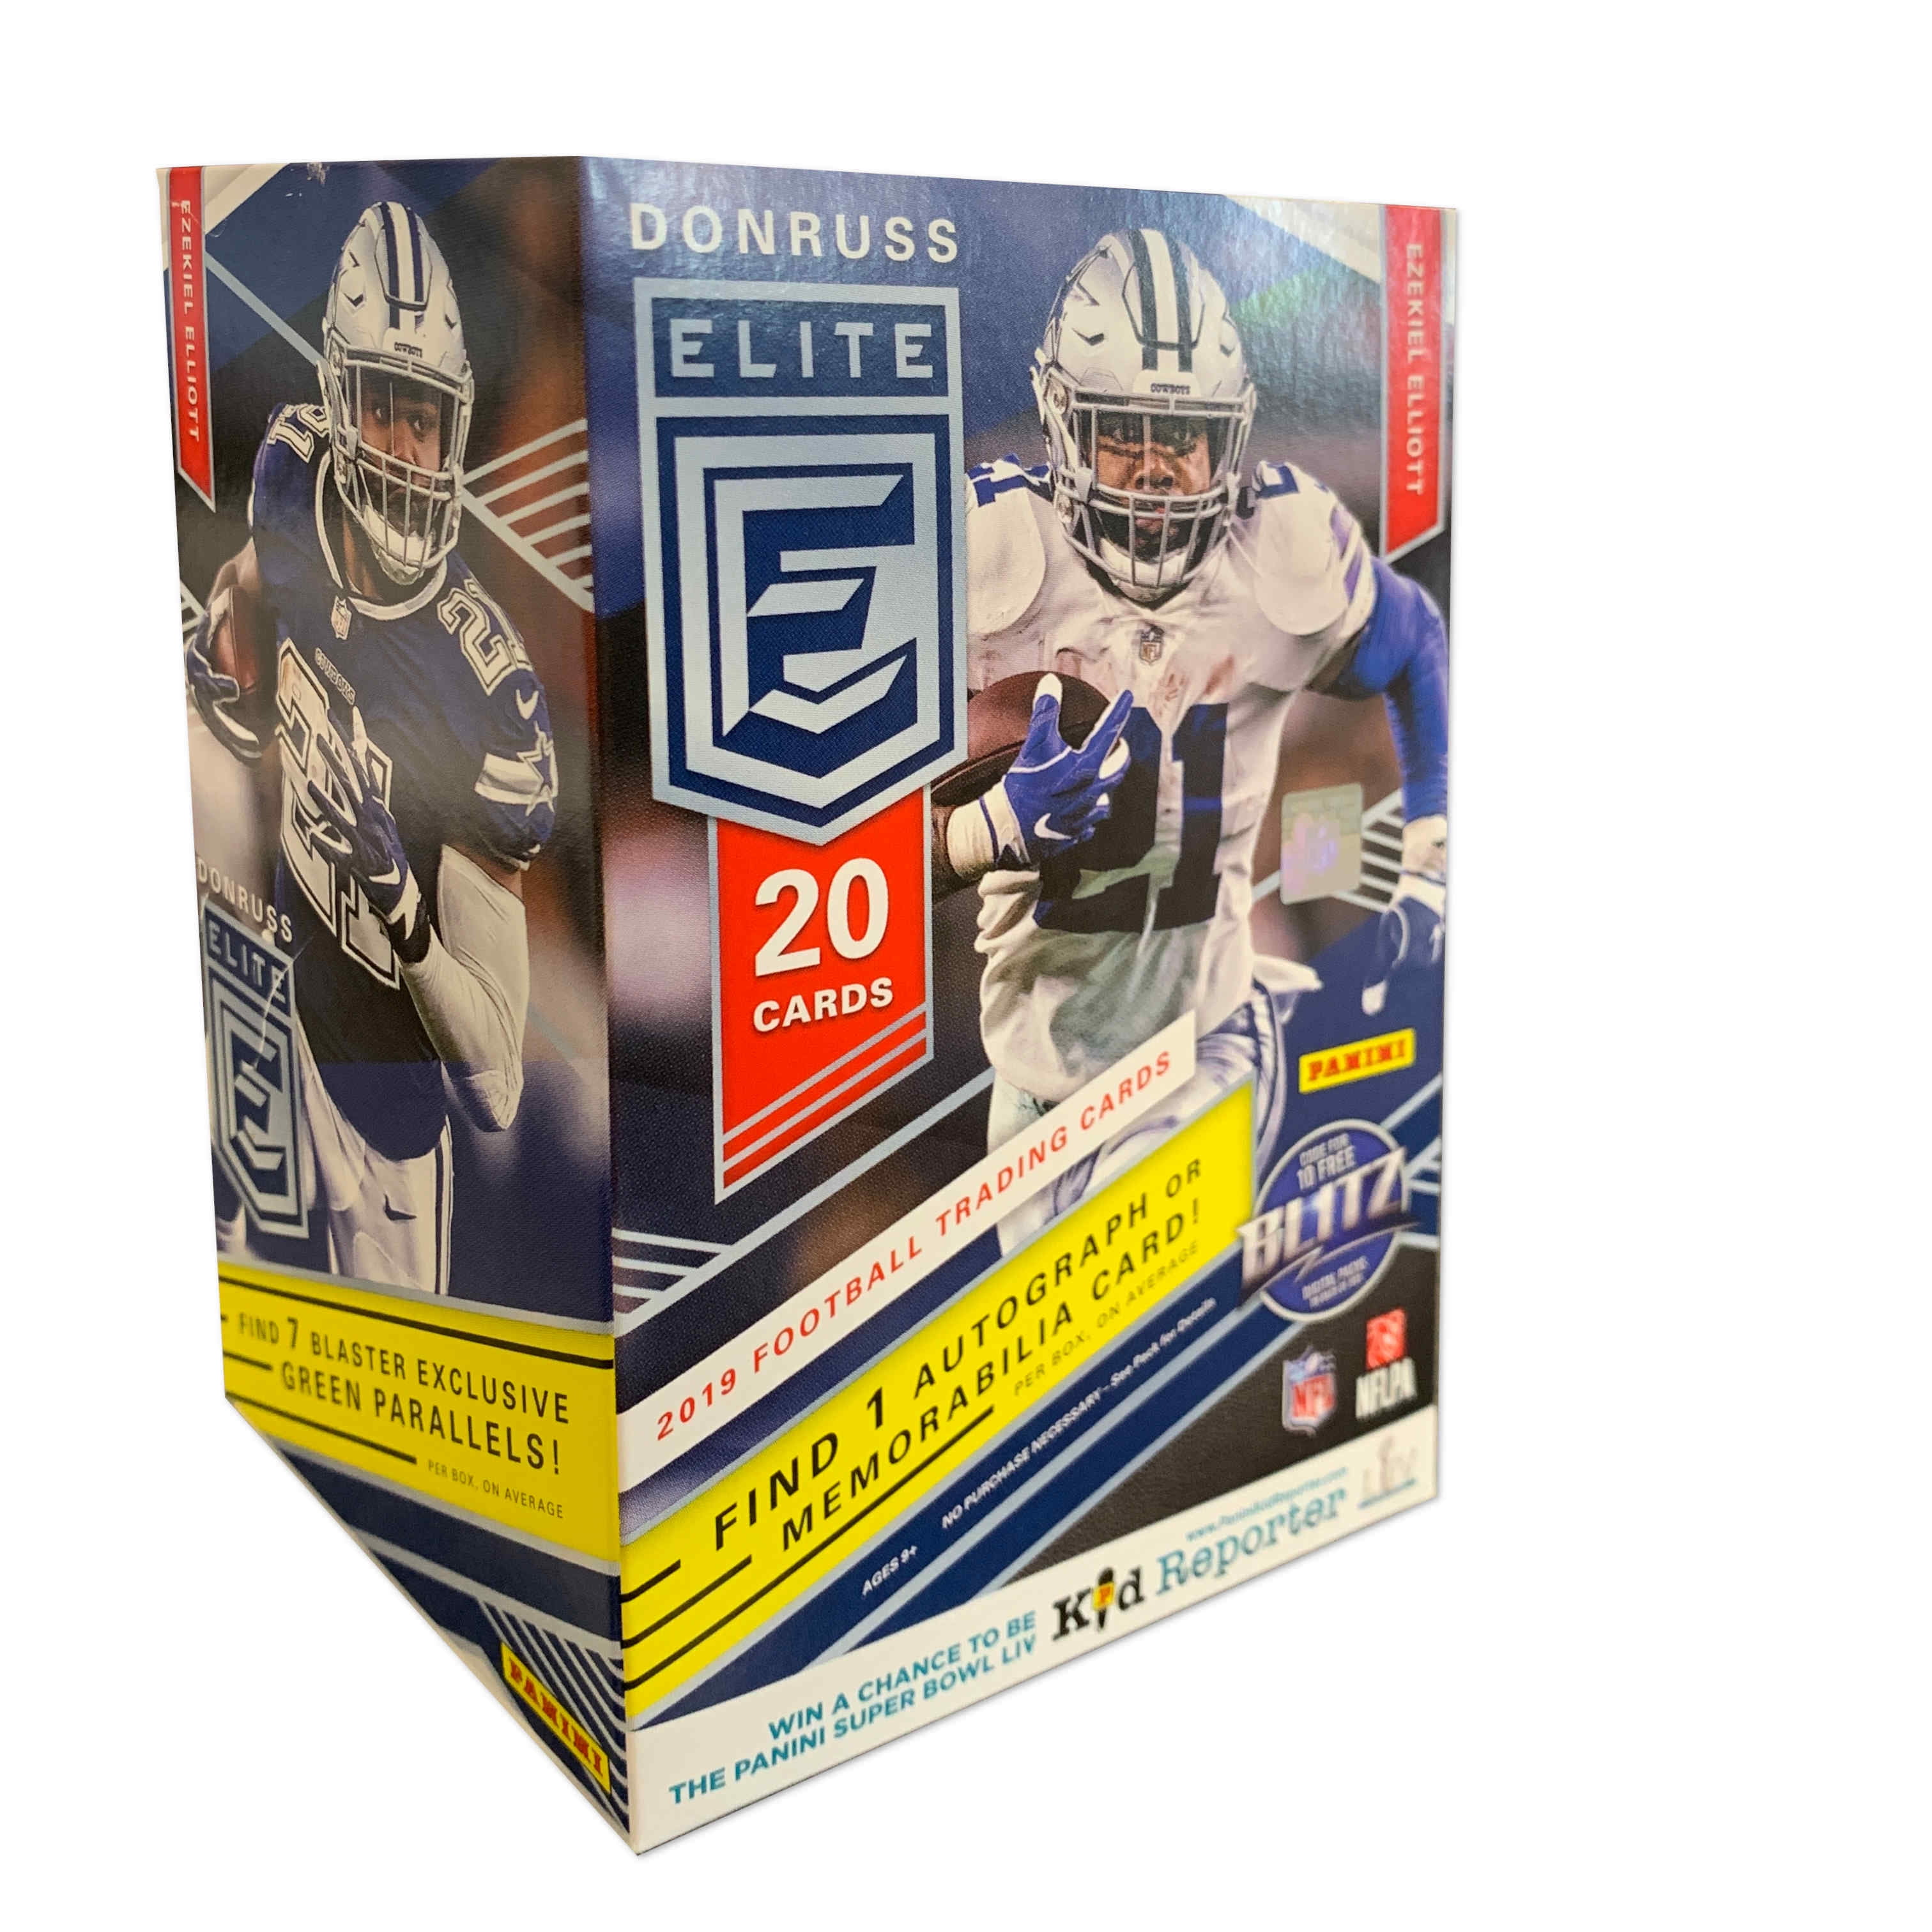 2019-panini-donruss-elite-nfl-football-blaster-box-first-cards-with